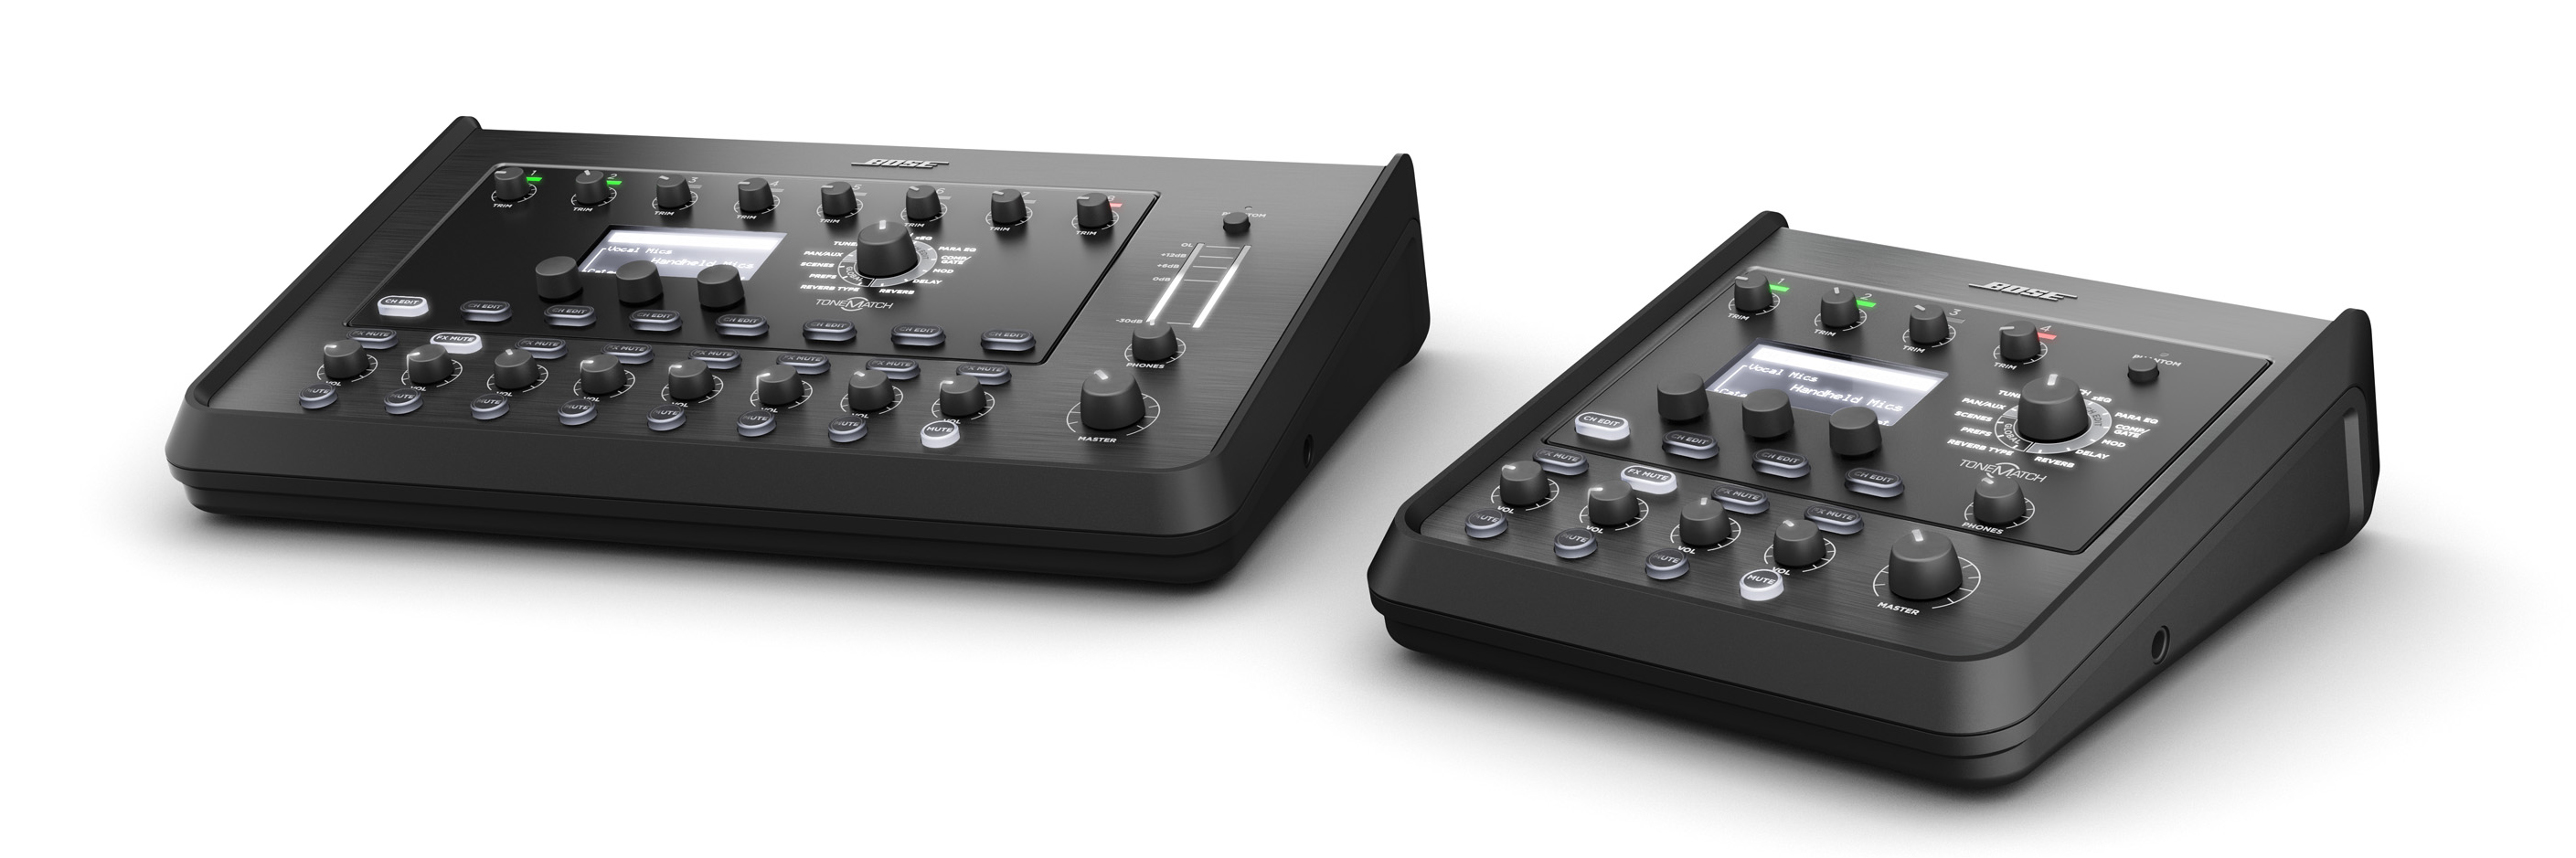 Bose ToneMatch T8S and T4S: audio mixers to accompany the artists on stage